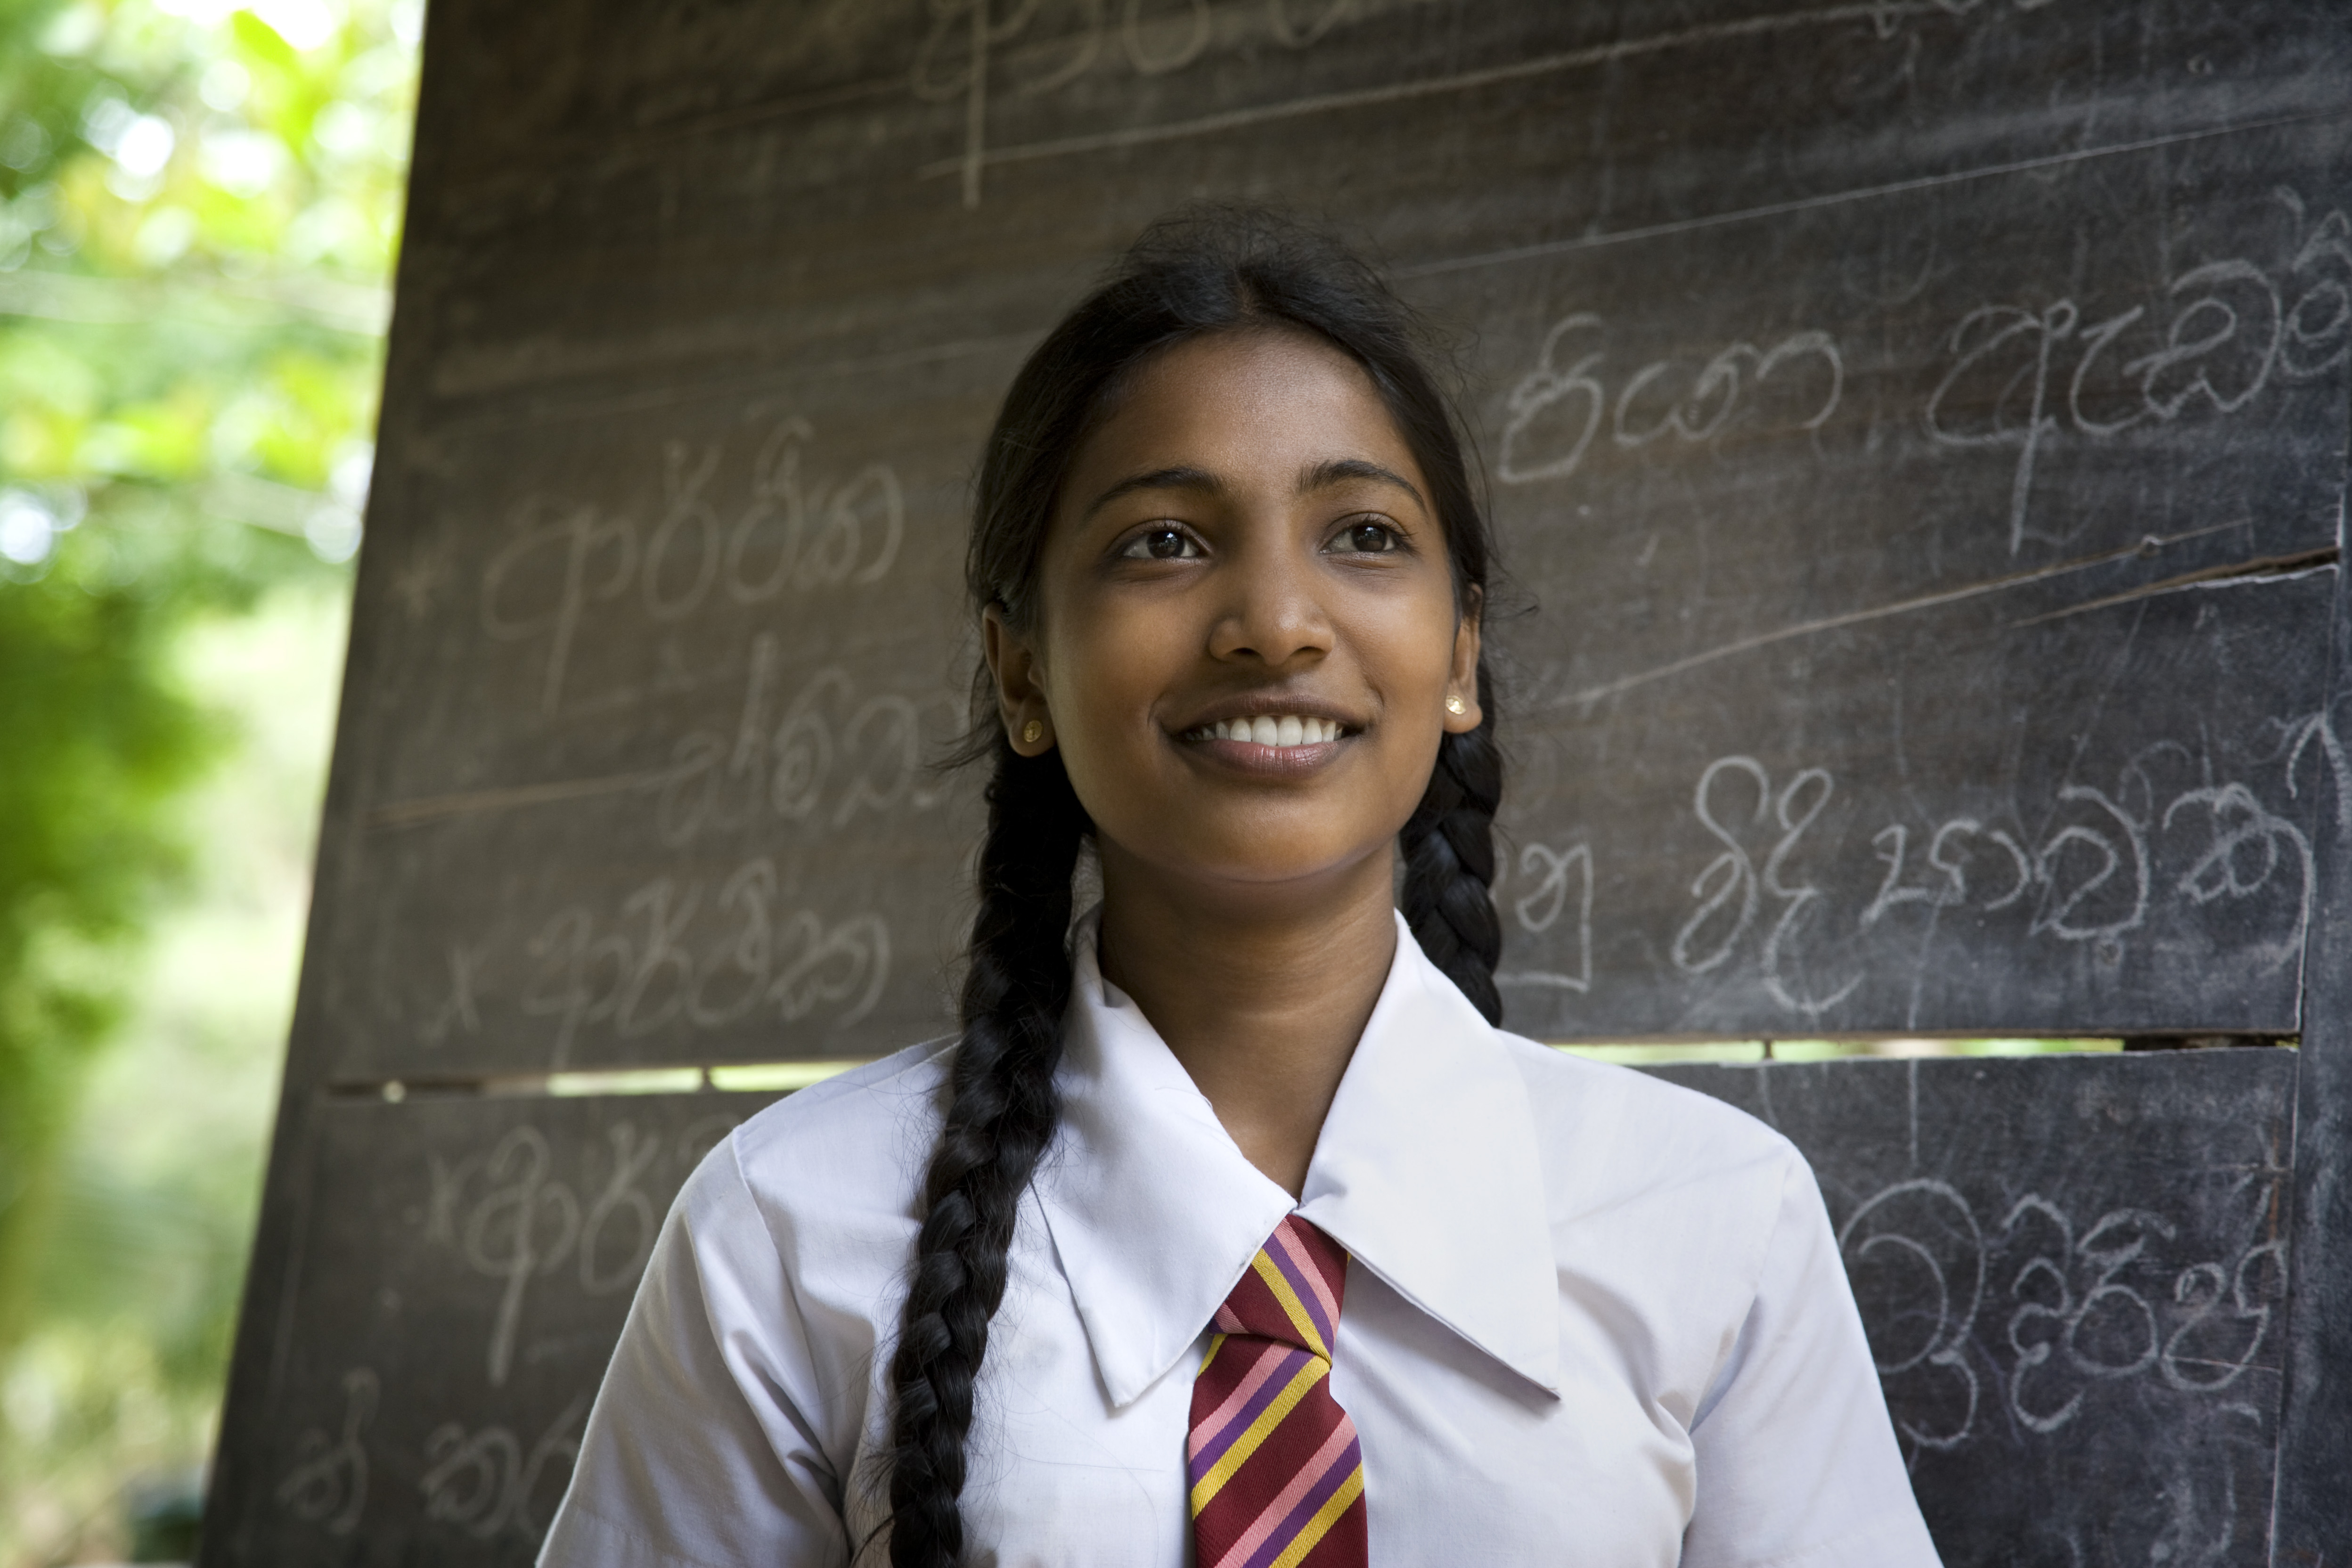 A South-Asian student with long hair | Source: Getty Images